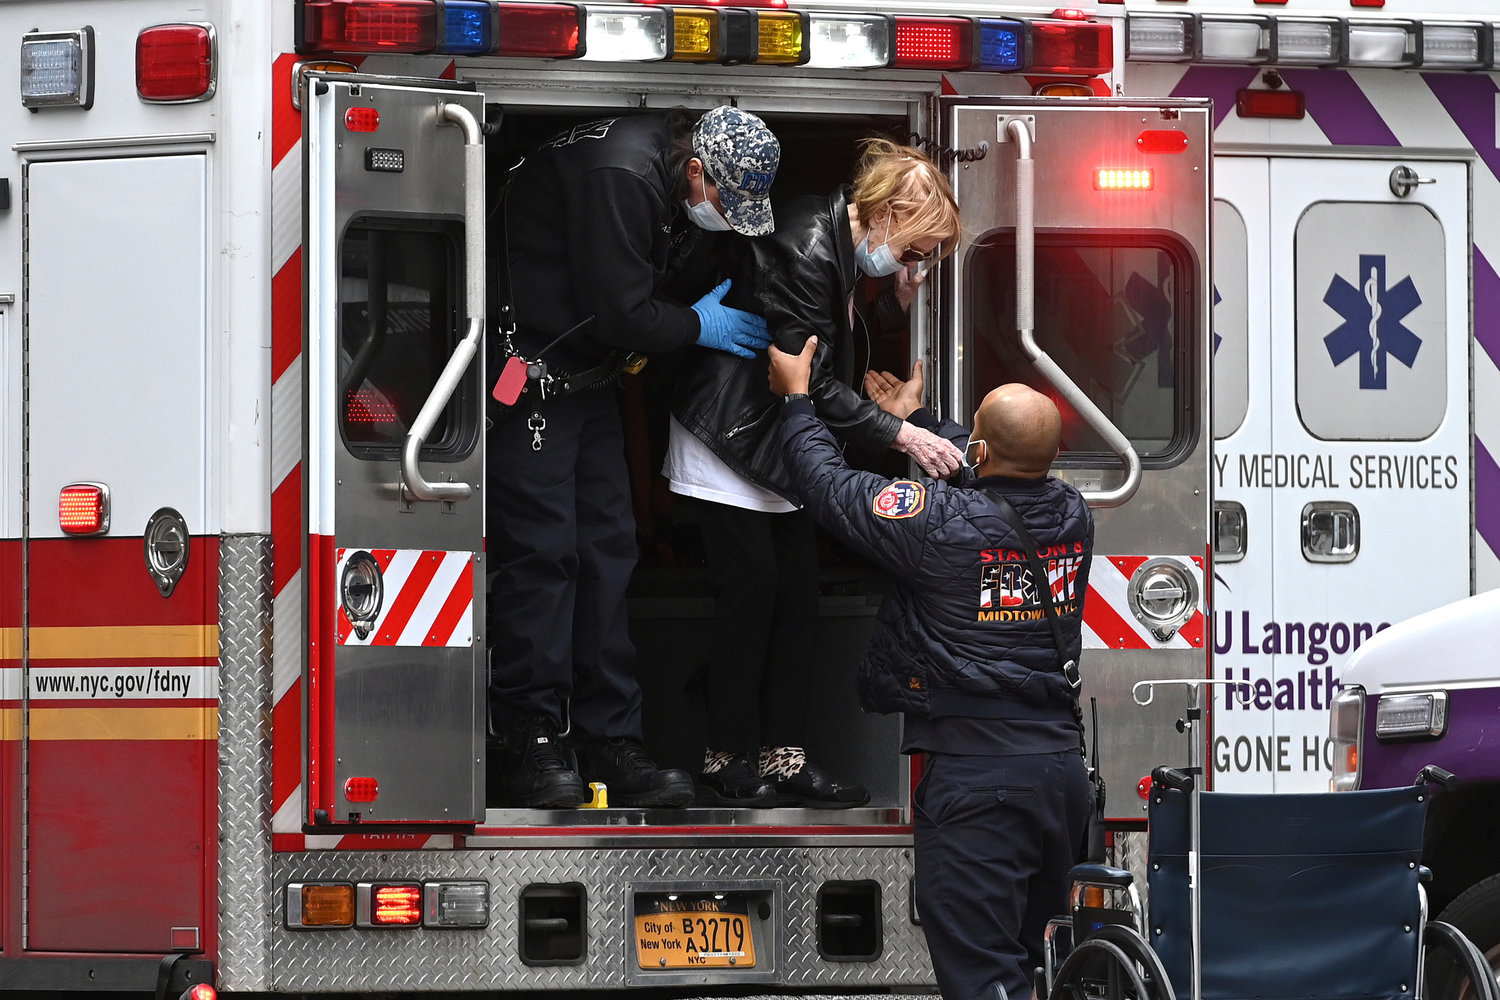 Unions representing EMTs, paramedics and EMS officers are suing the FDNY and the city after the federal government found that EMS first responders are being discriminated against. The suit alleges that EMS workers, 55 percent of whom are non-white,  carry out similar duties to firefighters for far less pay.